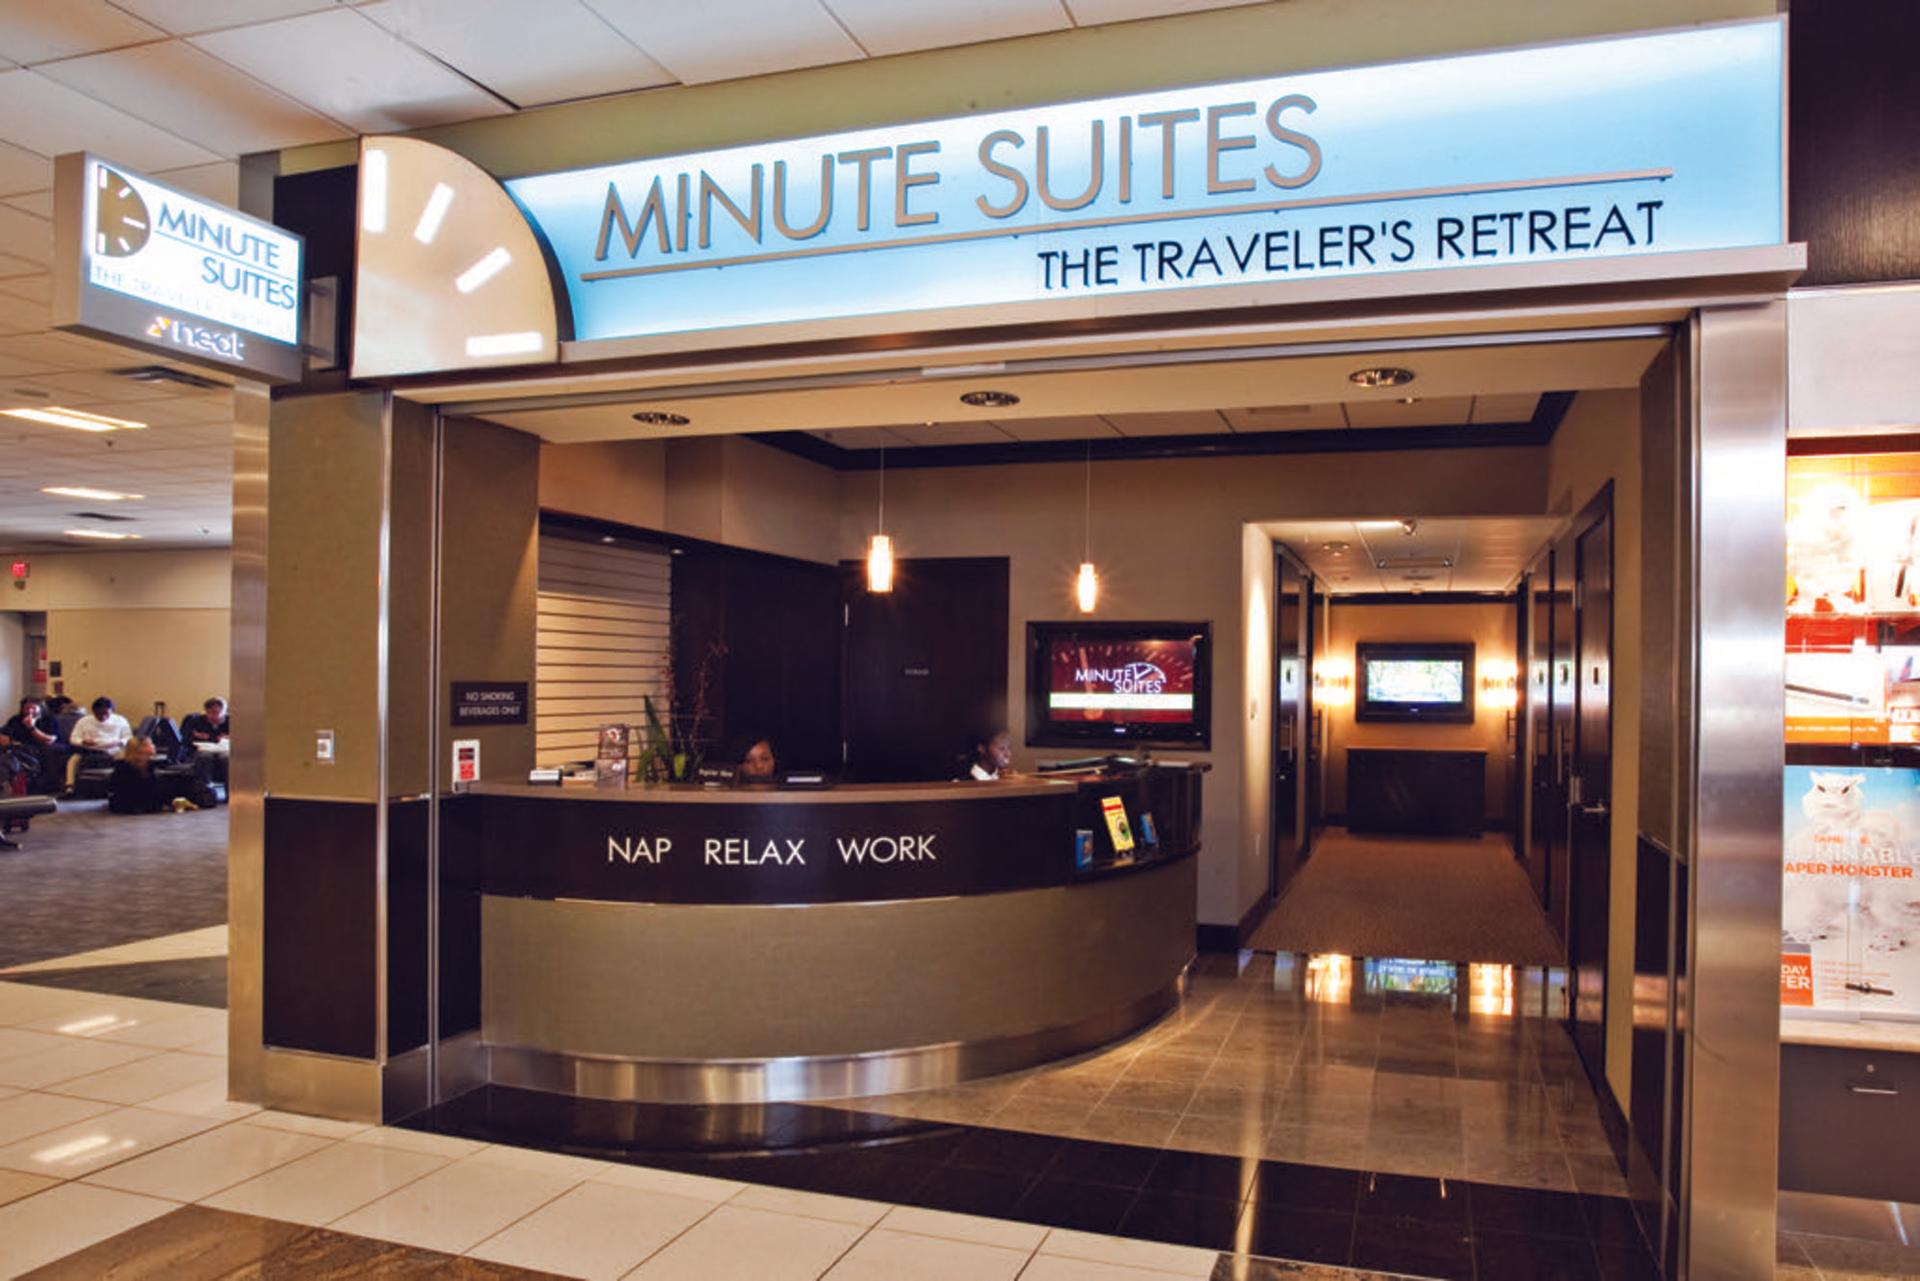 Minute Suites (Gate B15) image 11 of 19